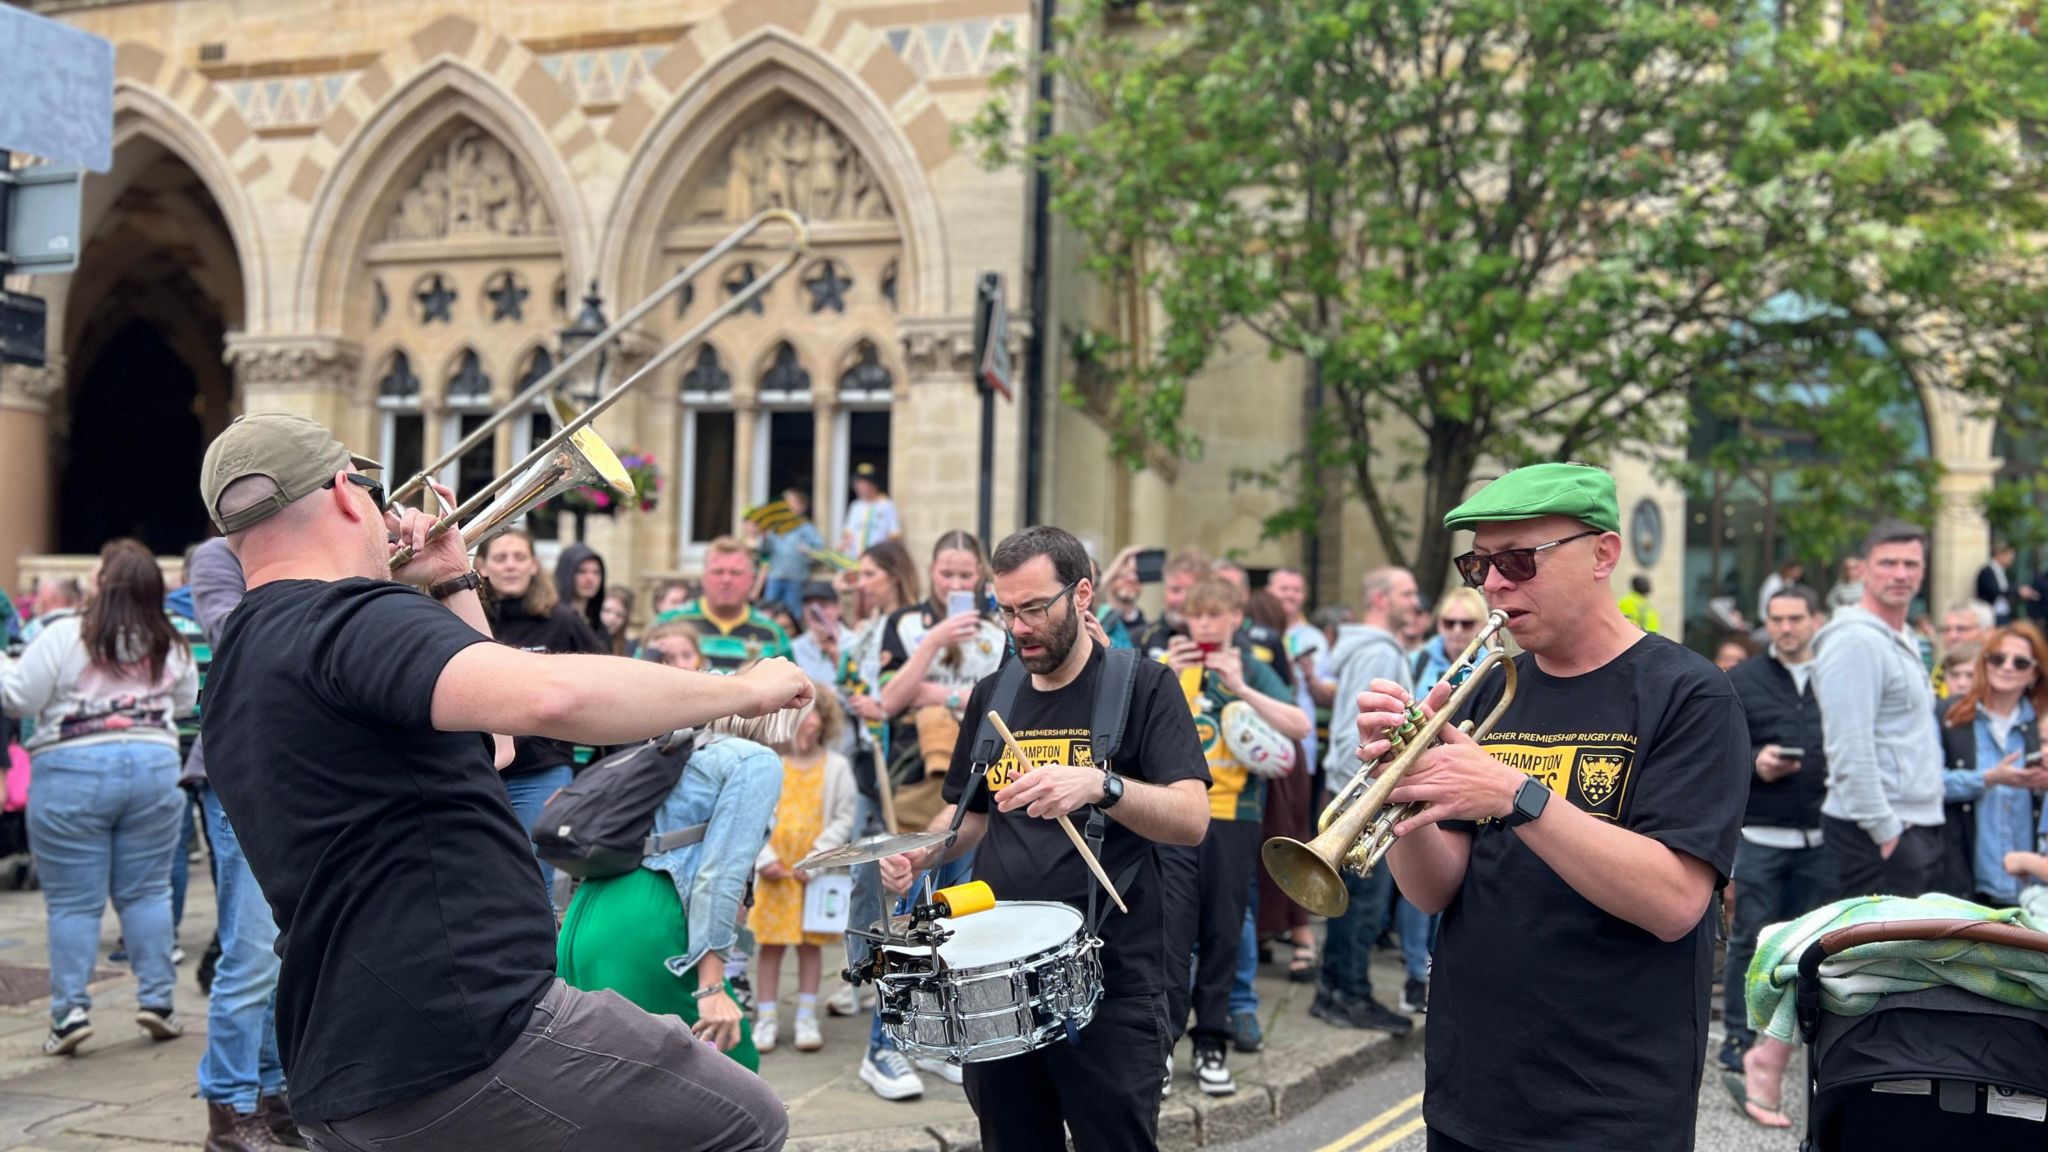 Bands were out in Northampton adding to the celebratory atmosphere